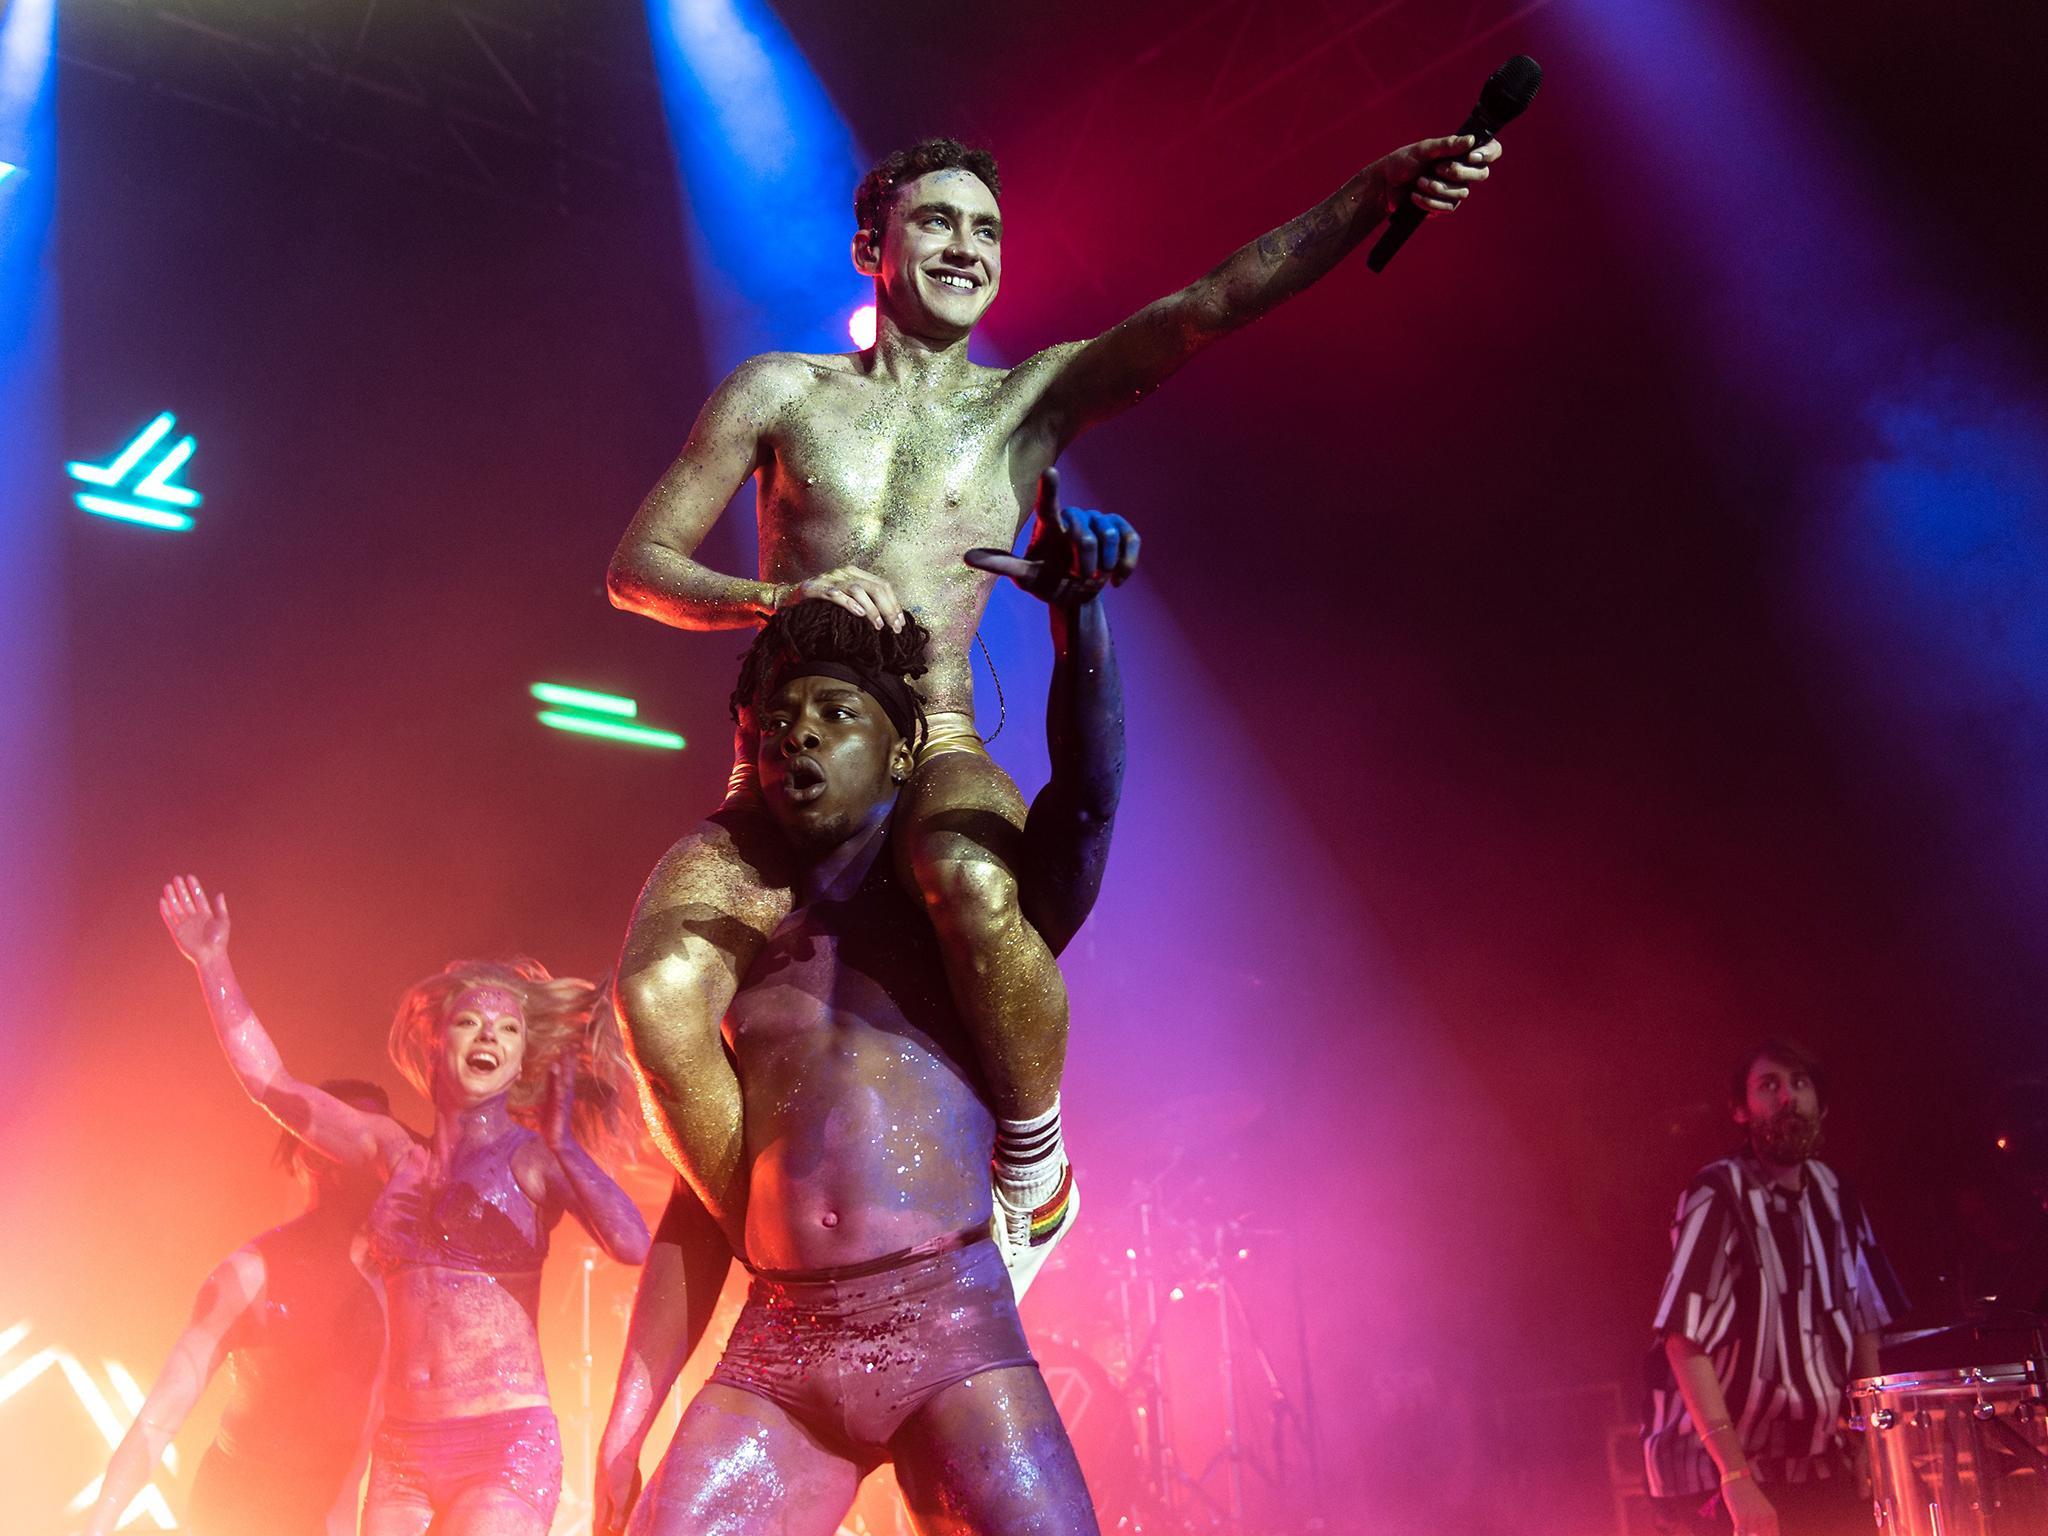 Years and Years singer Olly Alexander closes The Mighty Hoopla